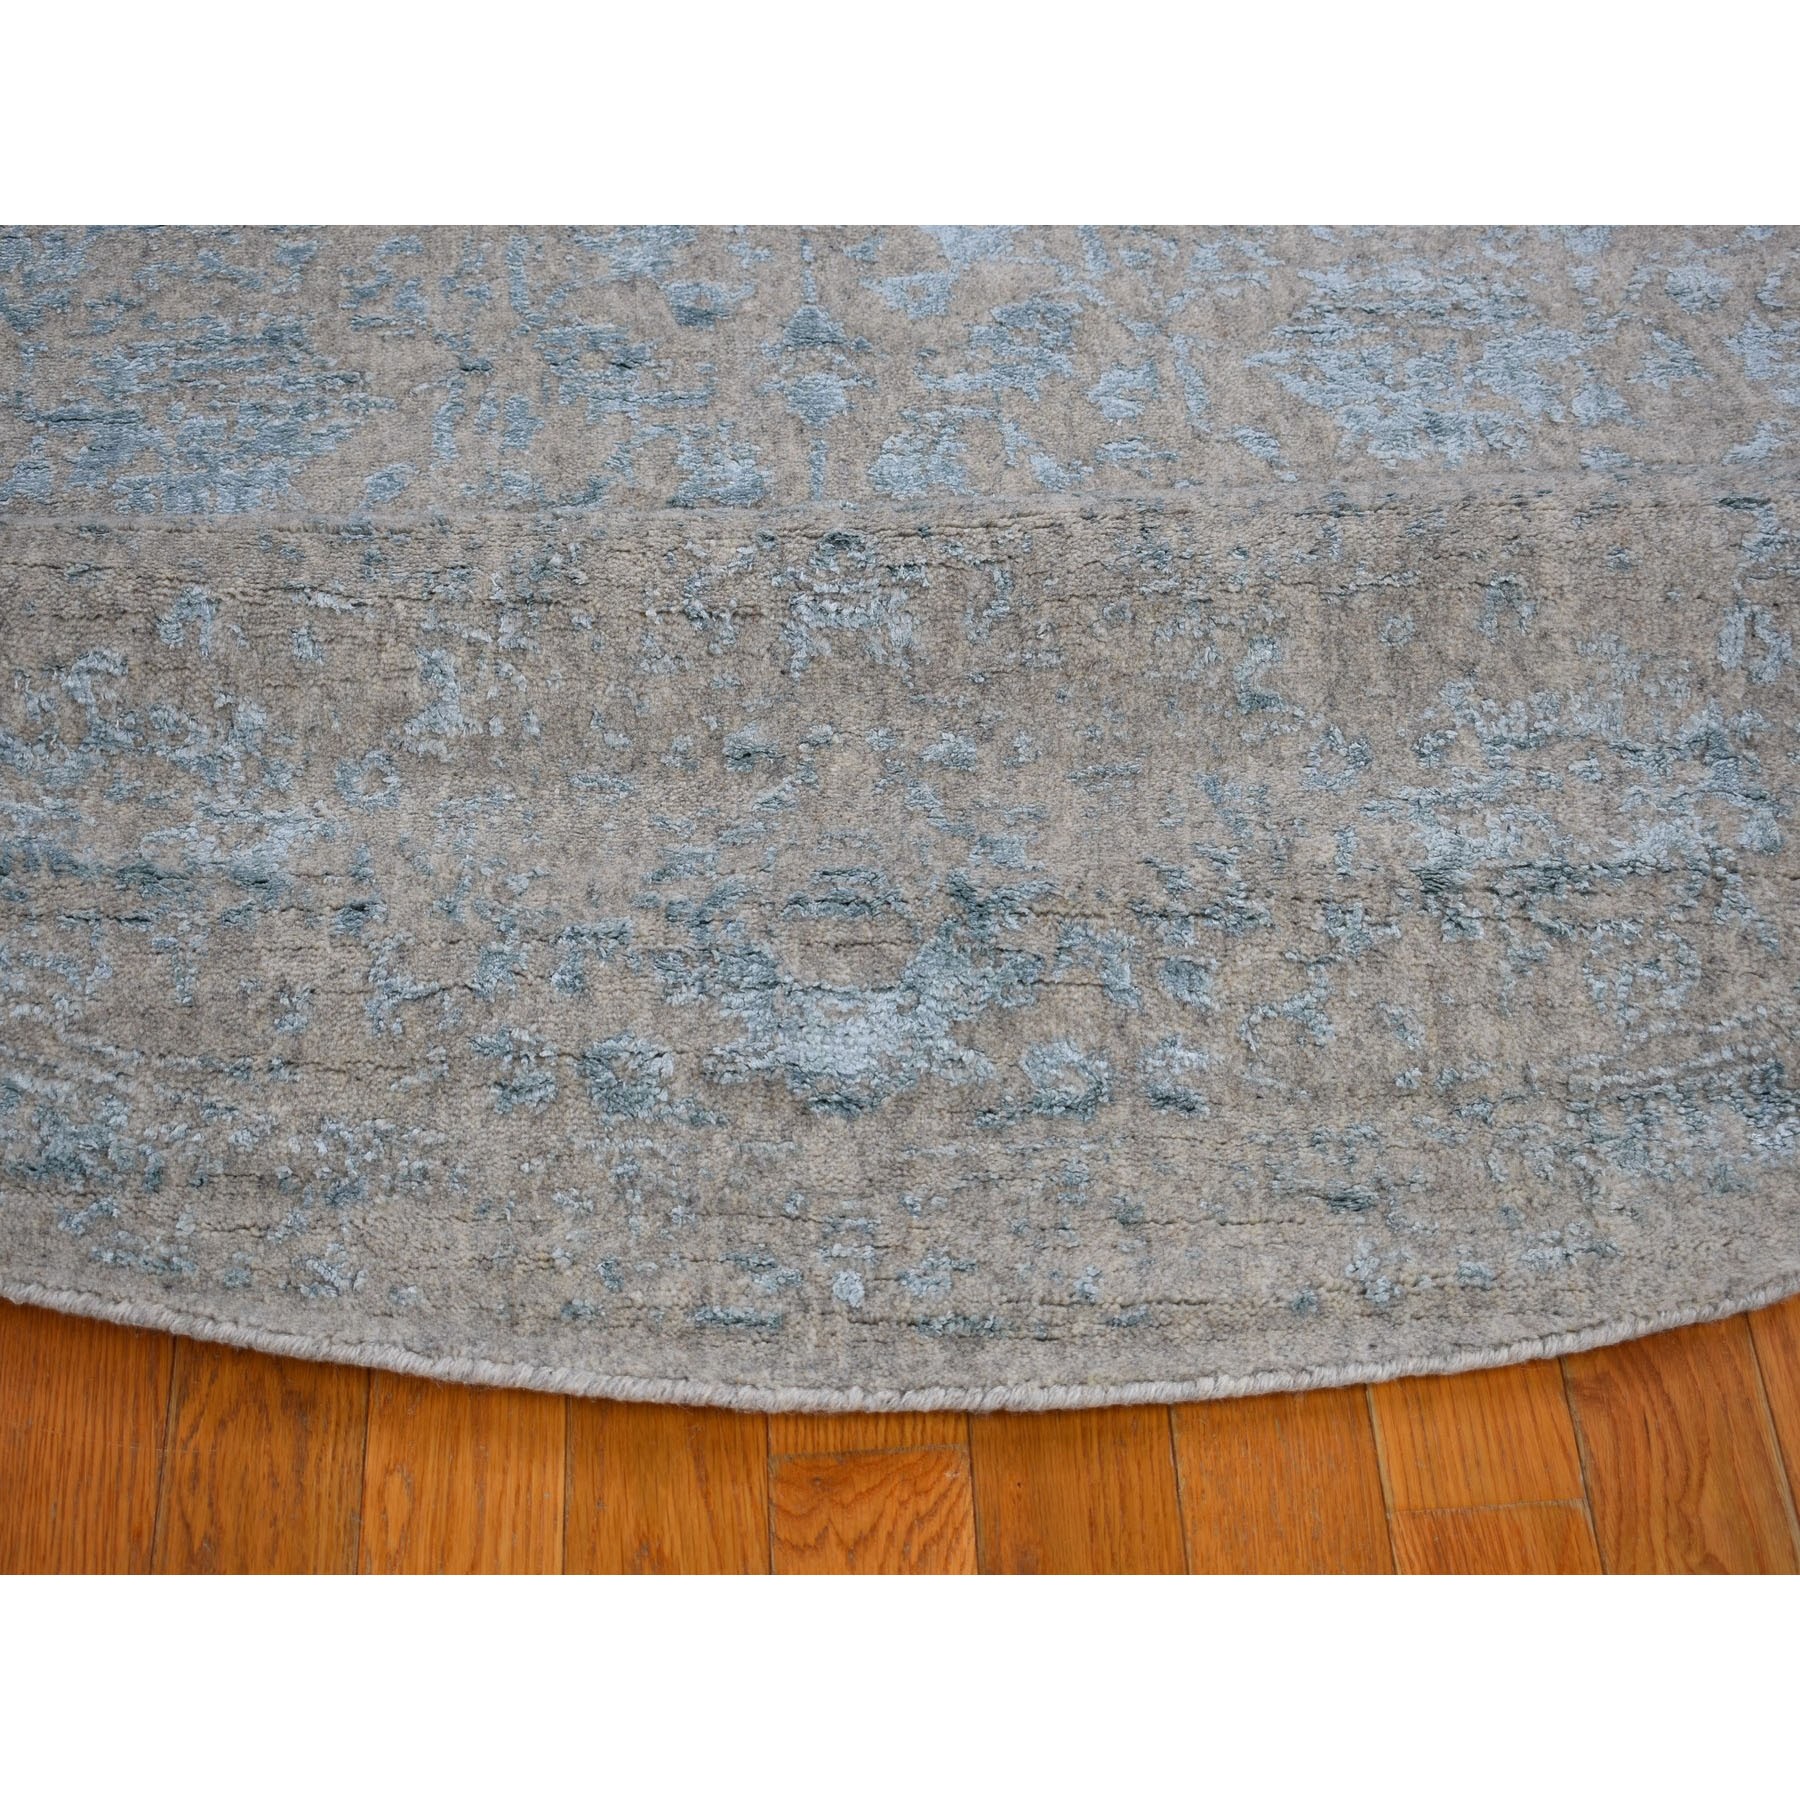 9-10 x9-10  Round Gray Broken Cypress Tree Design Wool And Silk Thick Hand Loomed Oriental Rug 